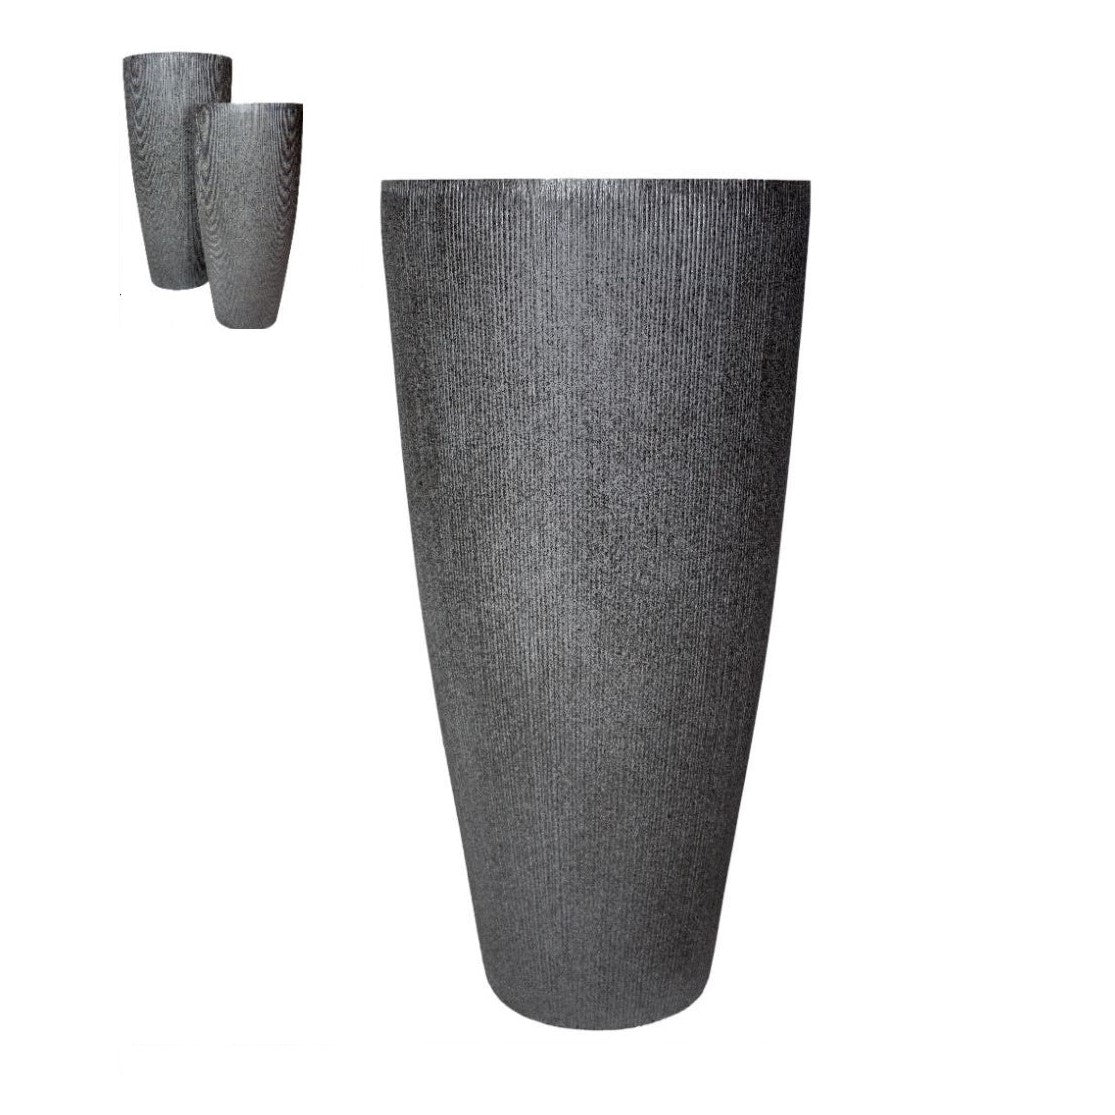 dark gray conical planter with smaller image of two more of the same planter